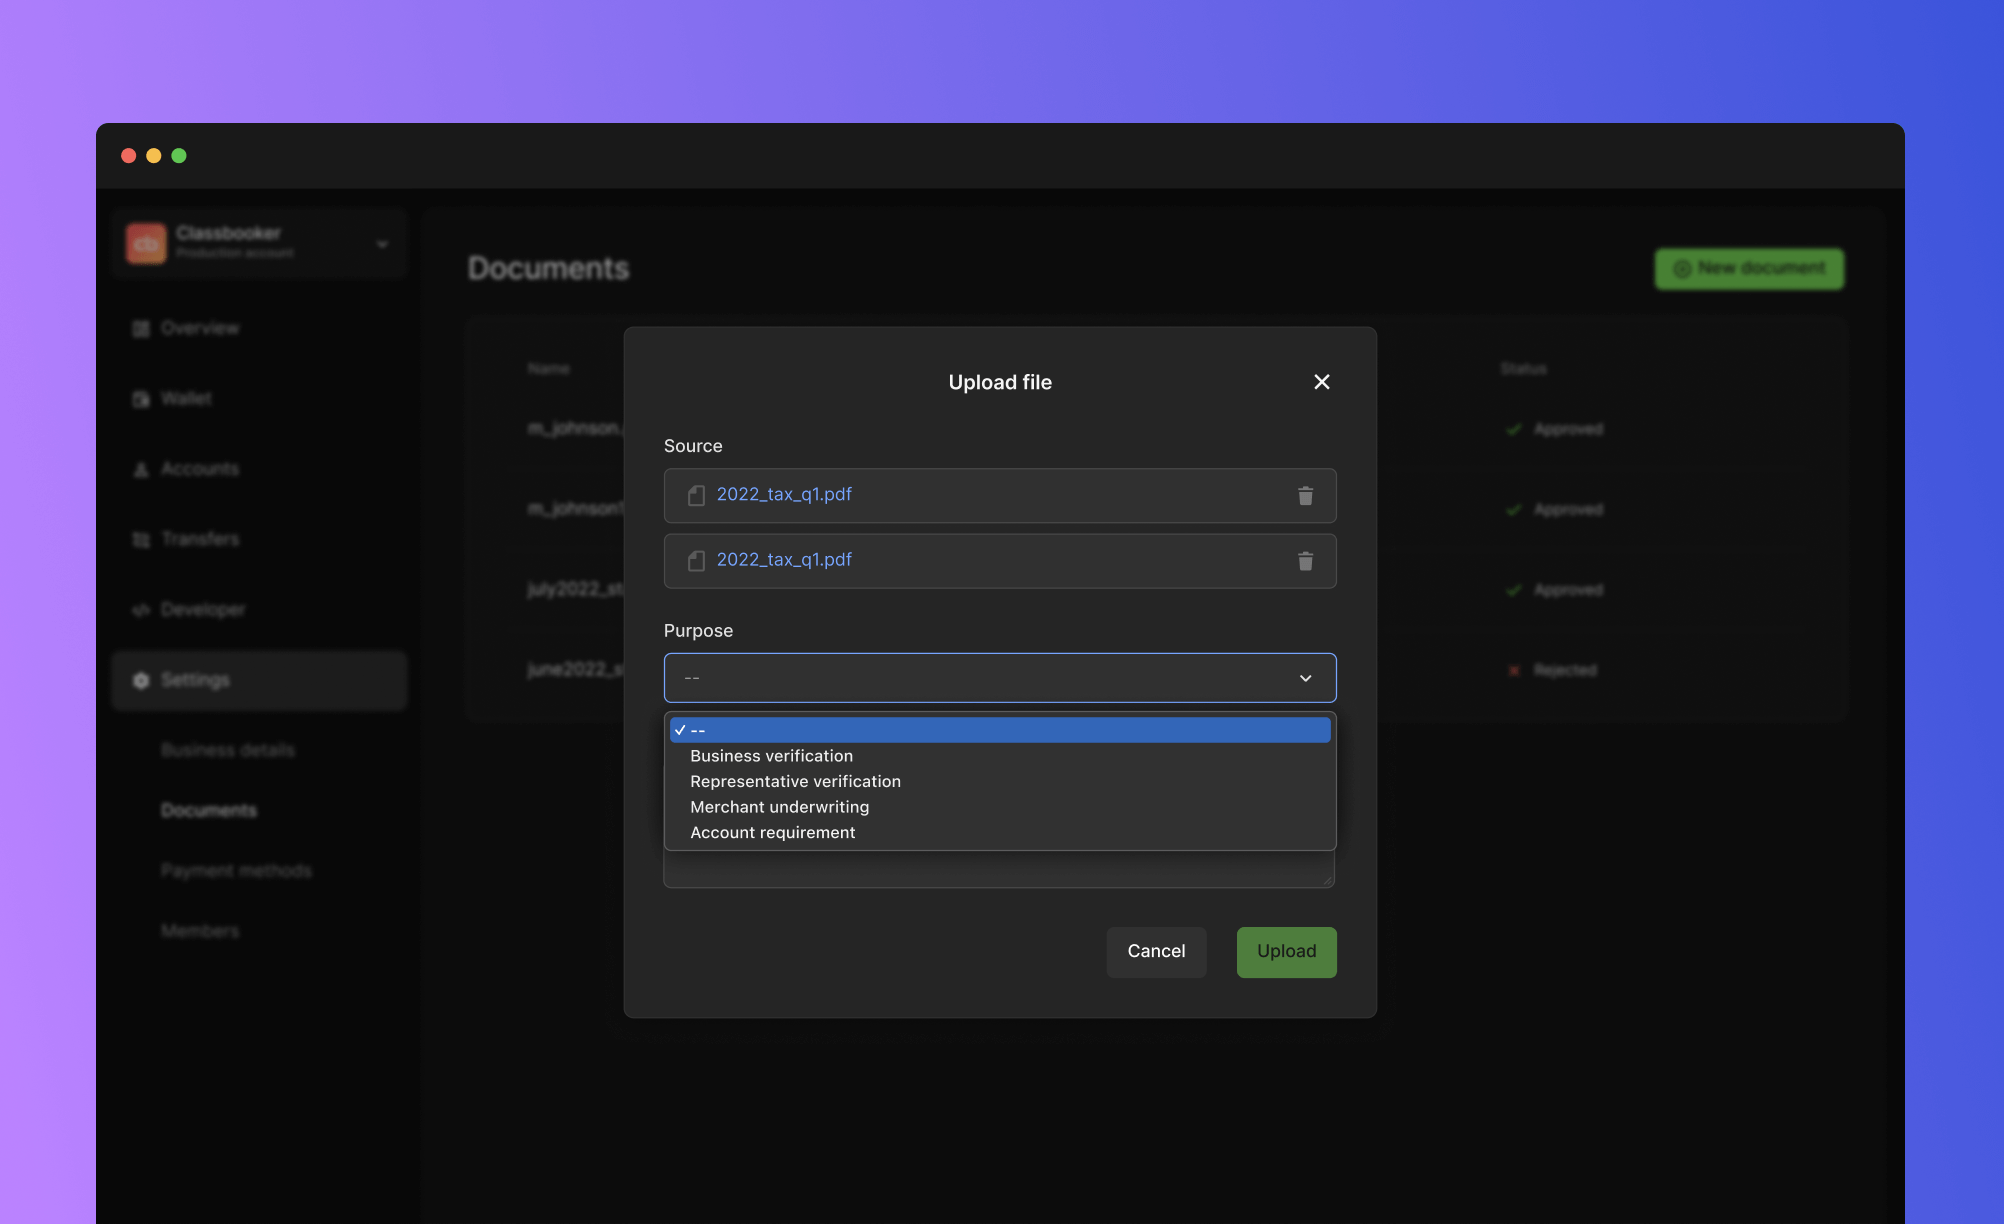 Upload documents from the Dashboard